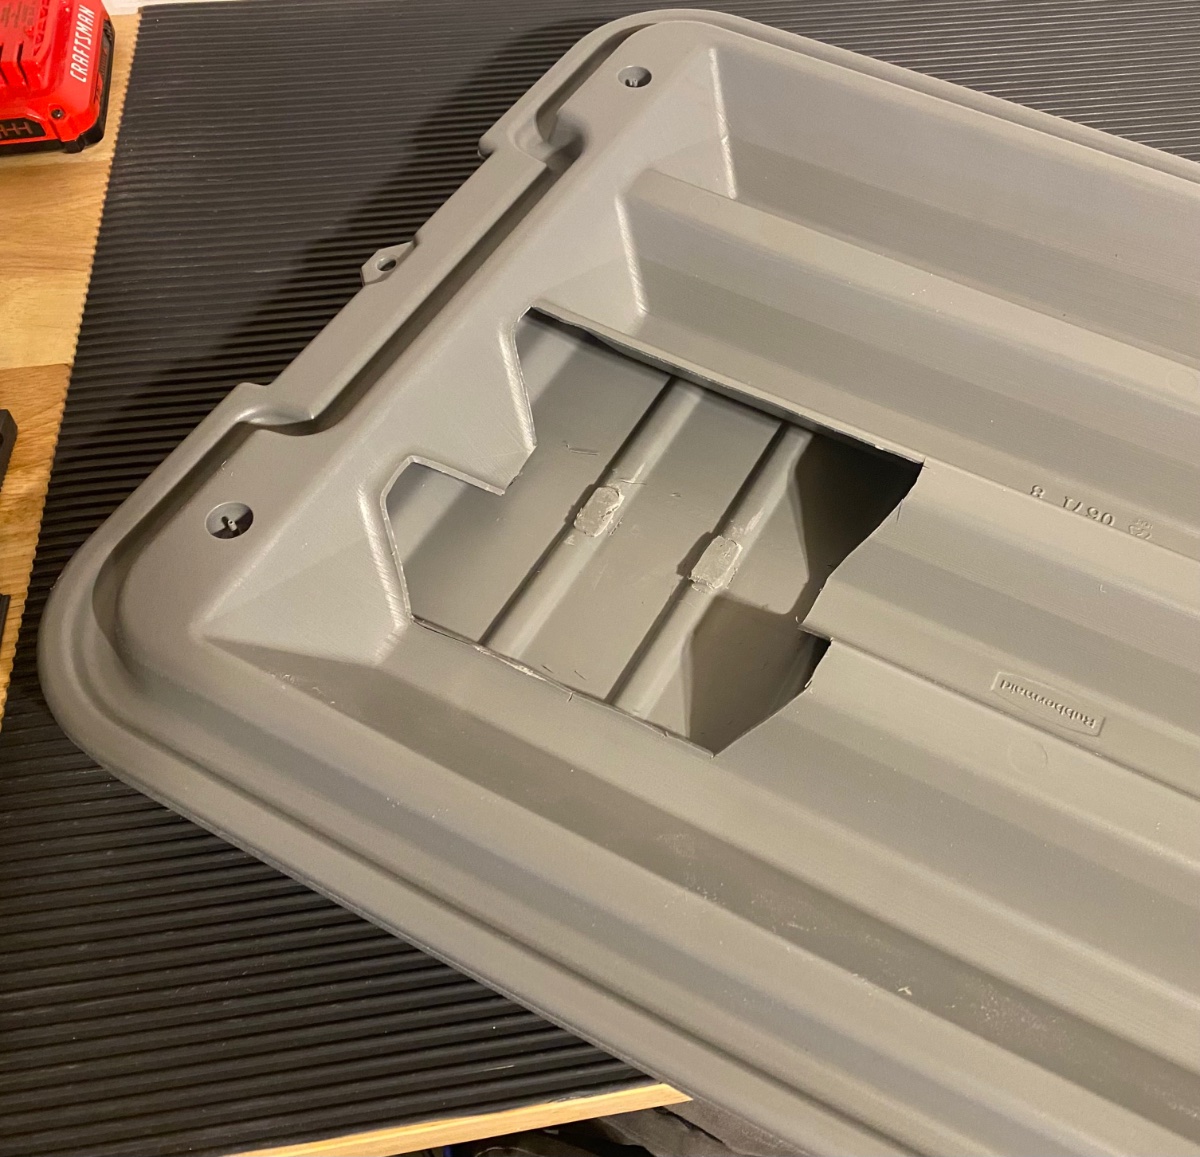 Action Packer Mod - Extra Organization and Storage in Lid